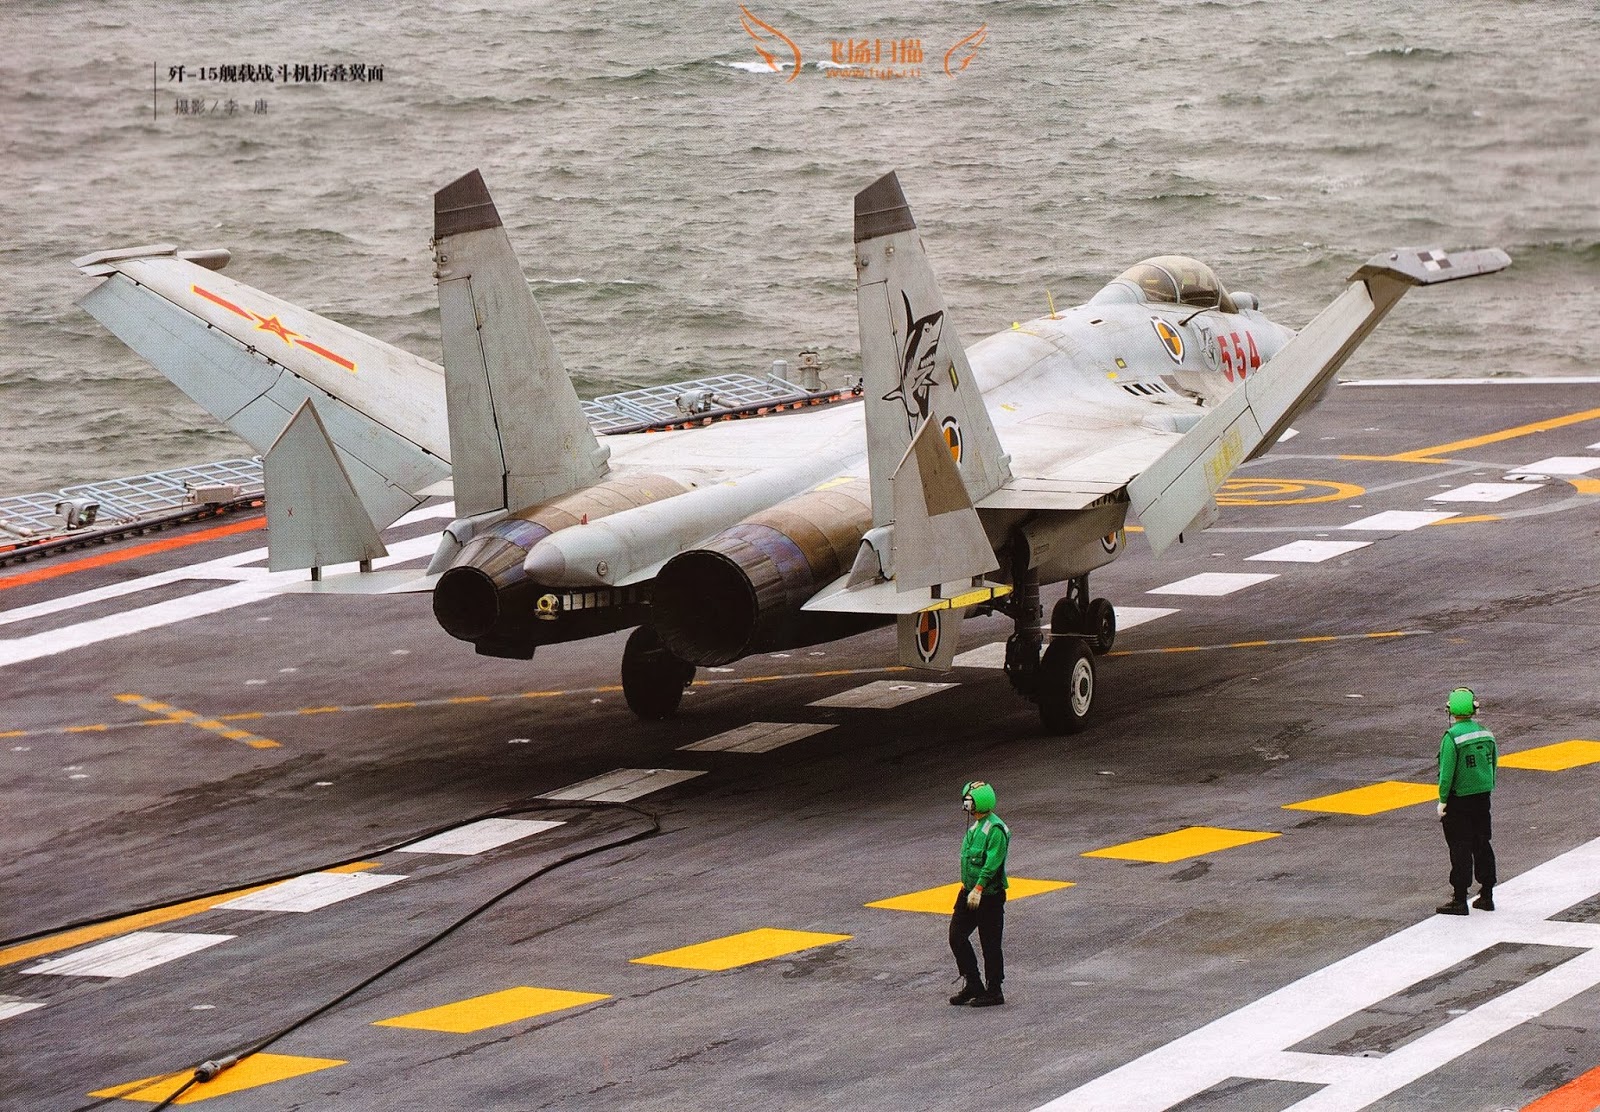 http://4.bp.blogspot.com/-evL0ACH5rLE/UmD63joo4tI/AAAAAAAAfEU/Jba8U_vMQAY/s1600/Chinese+J-15+Flying+Shark+Carrier+Borne+Naval+Fighter+Jet+which+can+carry+SD-10A+PL-12+BVRAAM+along+with+YJ-83C-803+Anti-Ship+Missiles+export+pakistan+sold+operational++(2).jpg